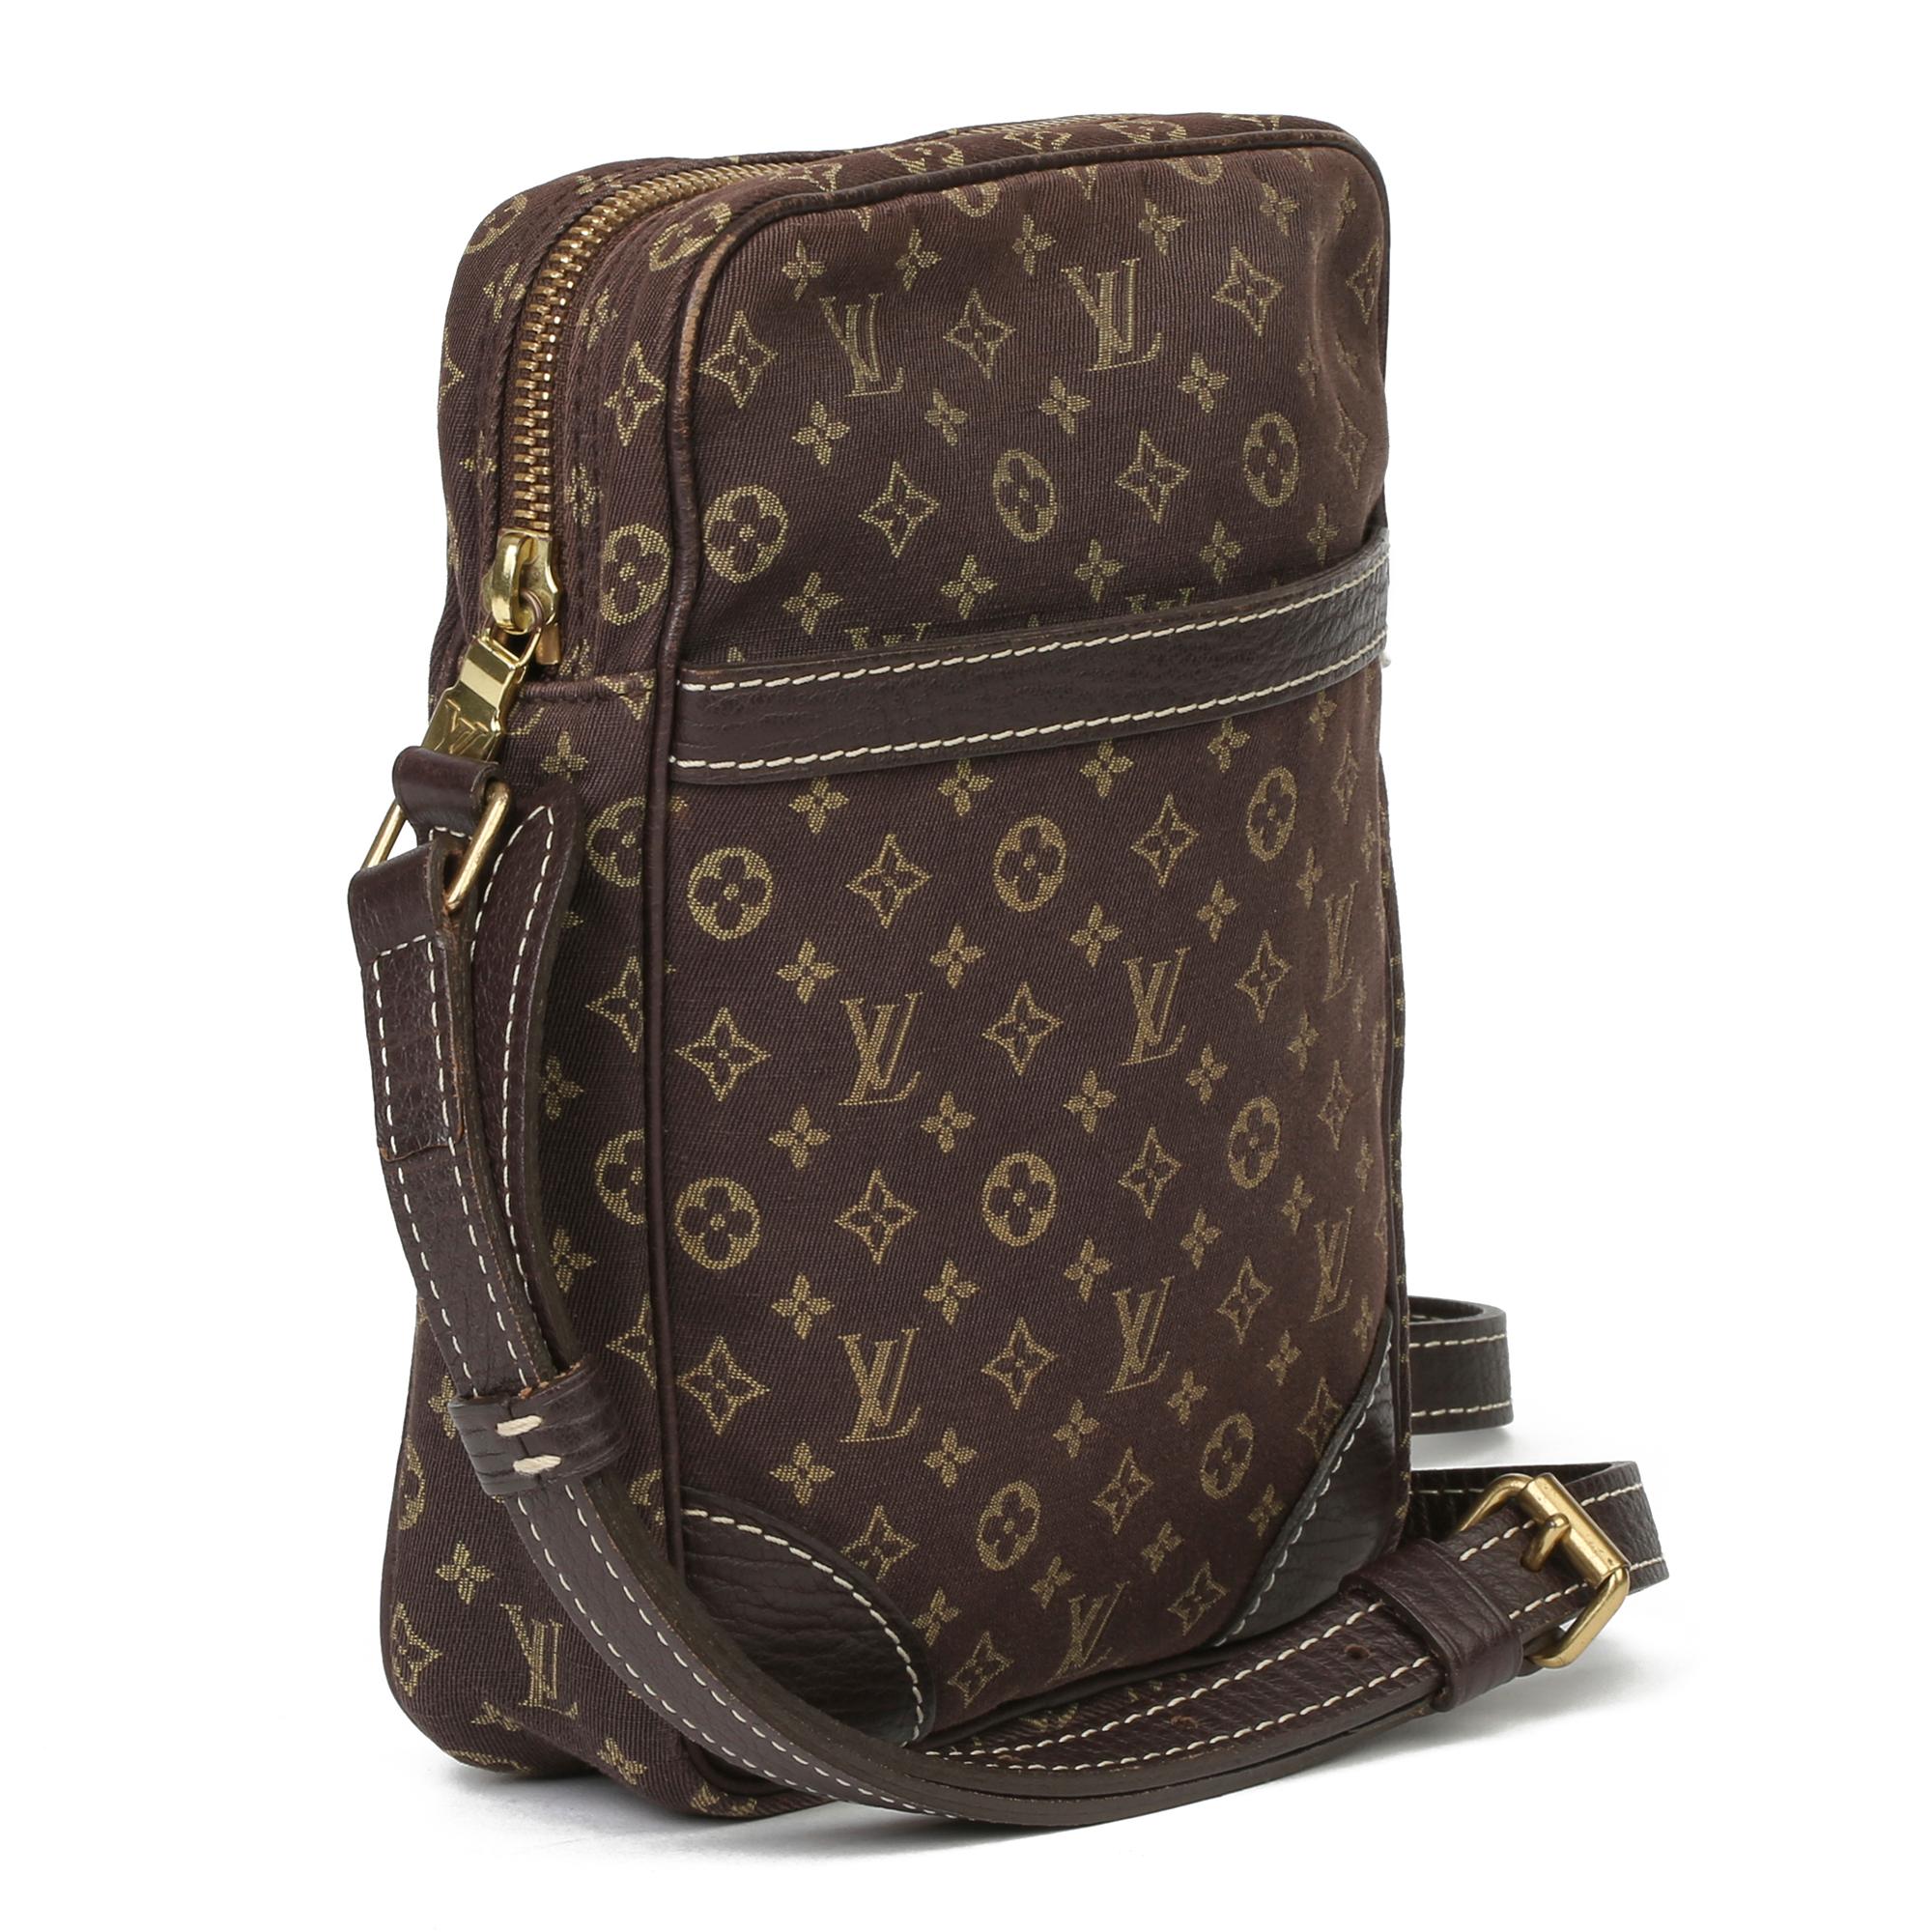 LOUIS VUITTON
Chocolate Calfskin Leather & Mini Monogram Canvas Danube

Xupes Reference: CB287
Serial Number: TH1006
Age (Circa): 2006
Authenticity Details: Date Stamp (Made in France) 
Gender: Ladies
Type: Shoulder, Crossbody

Colour: